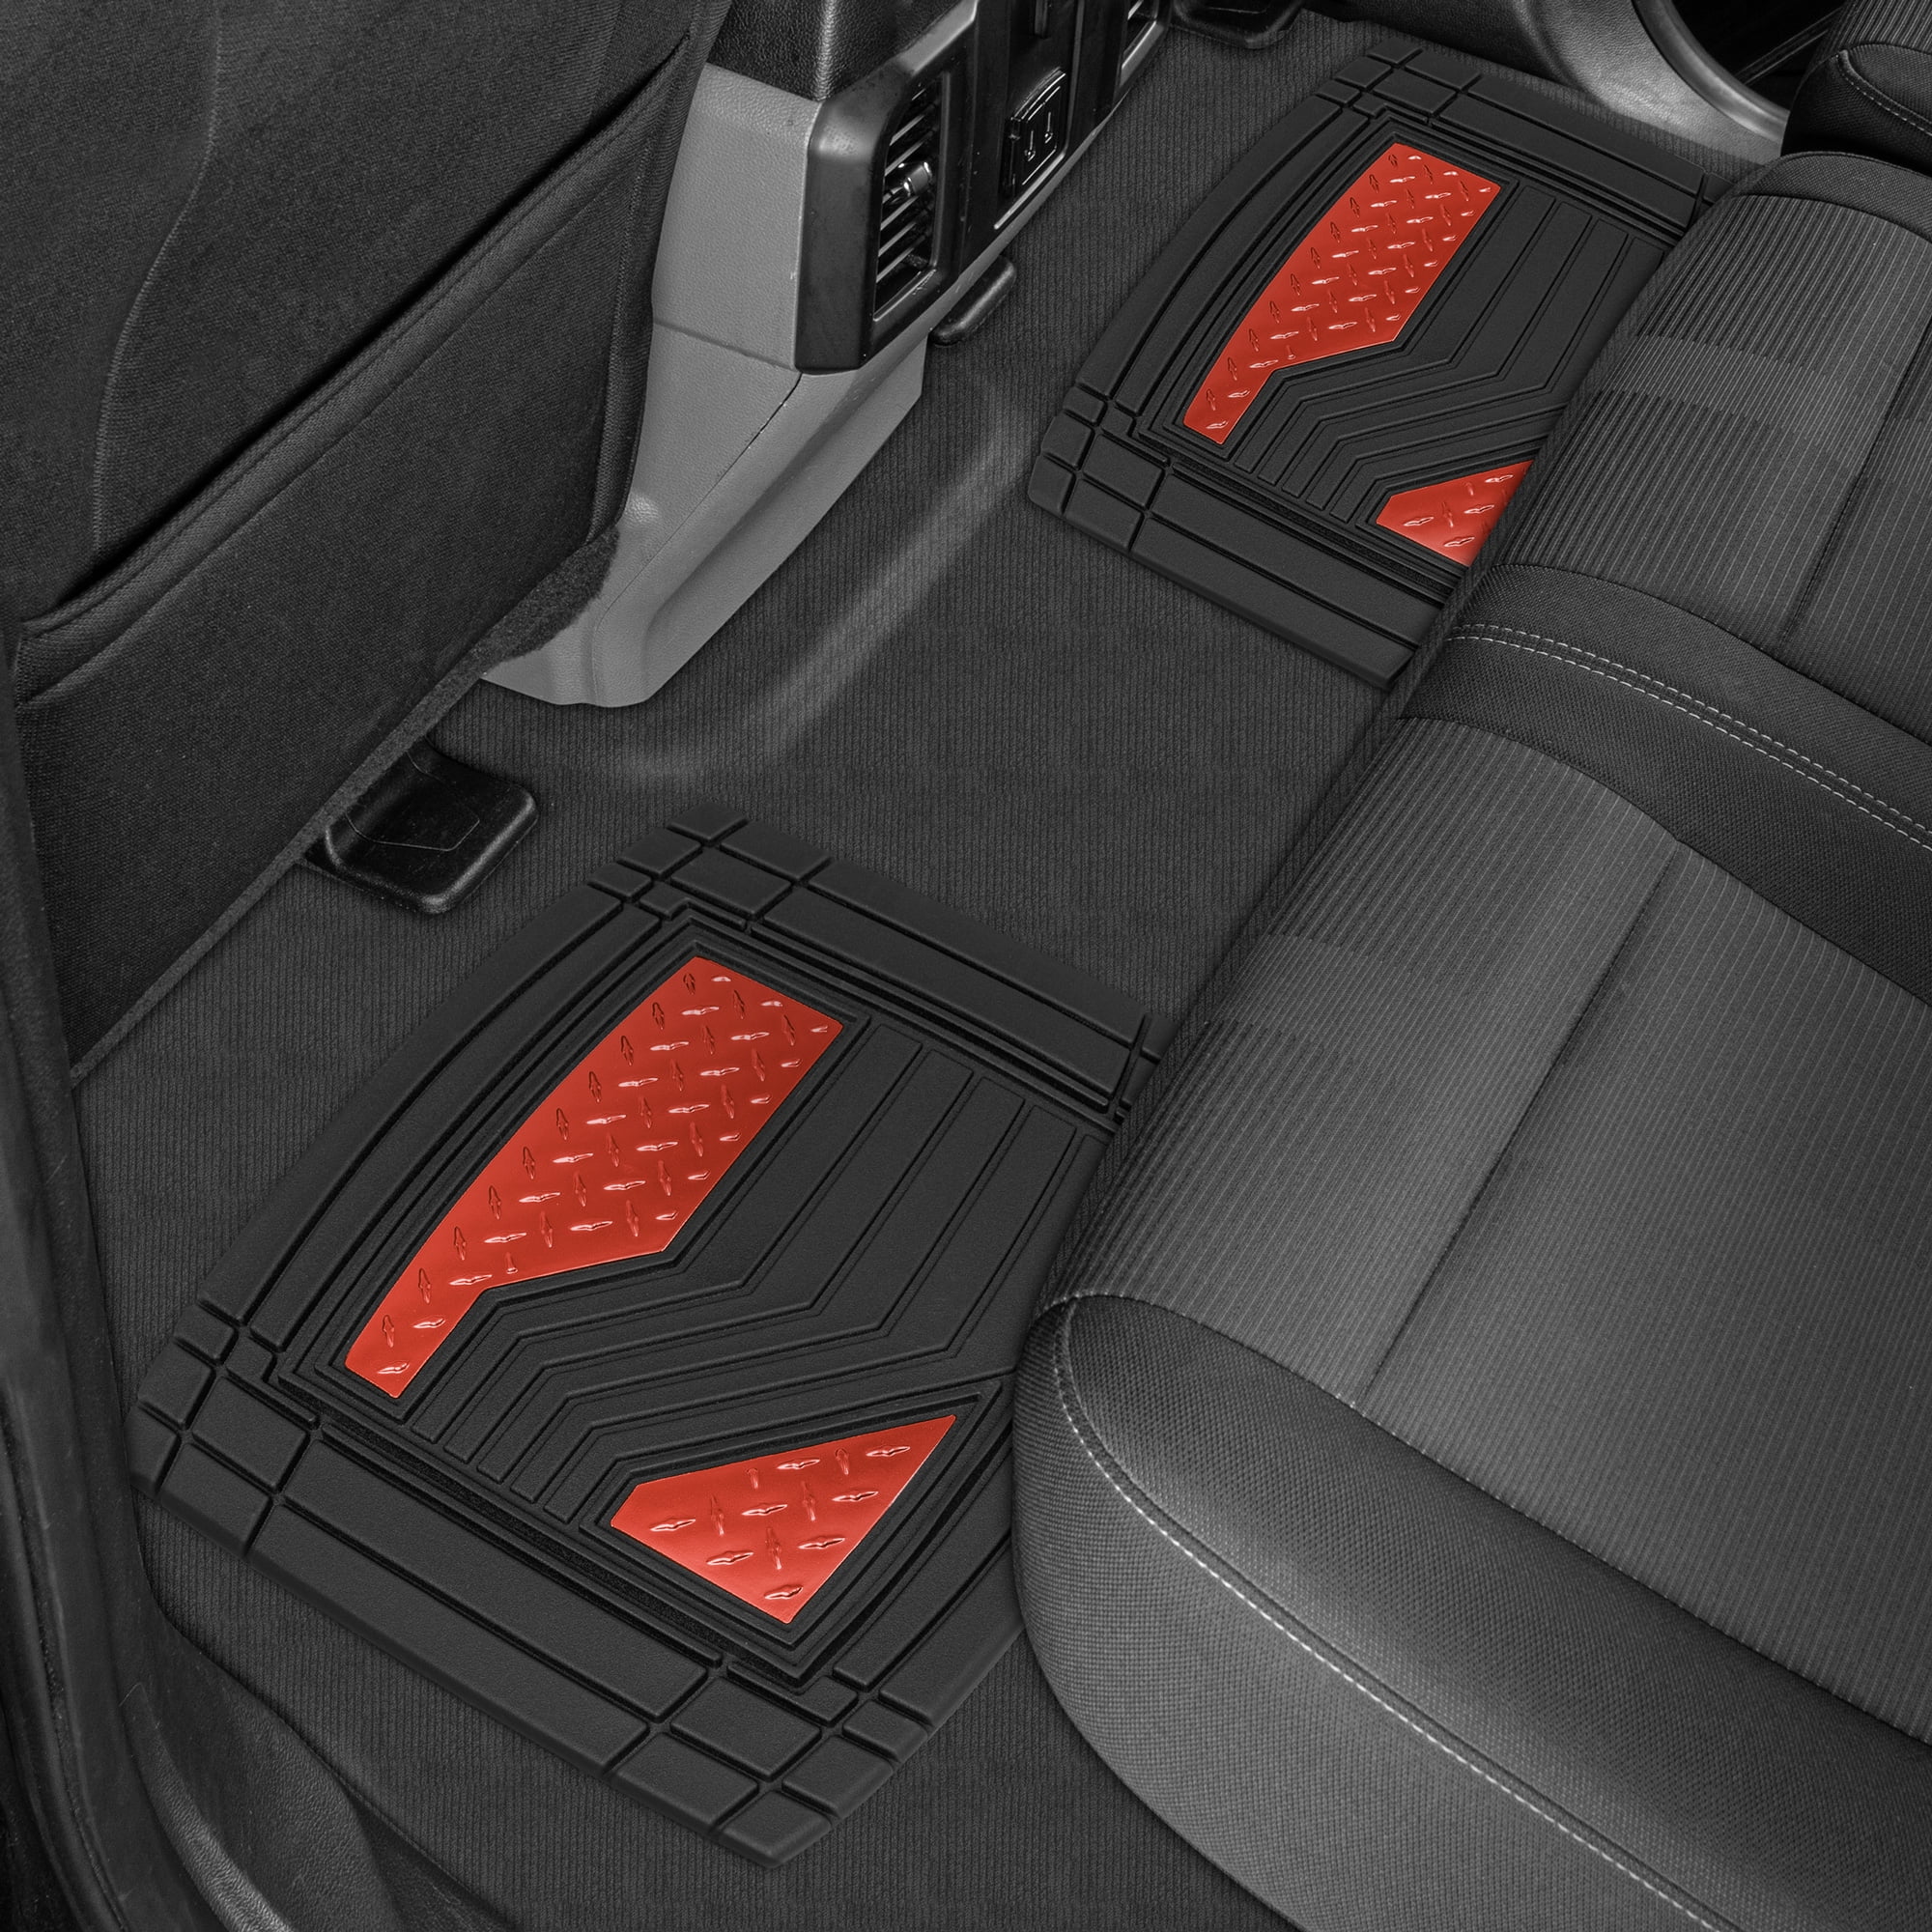 Caterpillar Diamond Steel Heavy-Duty Rubber Floor Mats & Cargo Trunk Liner  for Car SUV Van Sedan, Black & Red - Odorless Trim to Fit, All Weather Deep  Dish, Total Dirt Protection 